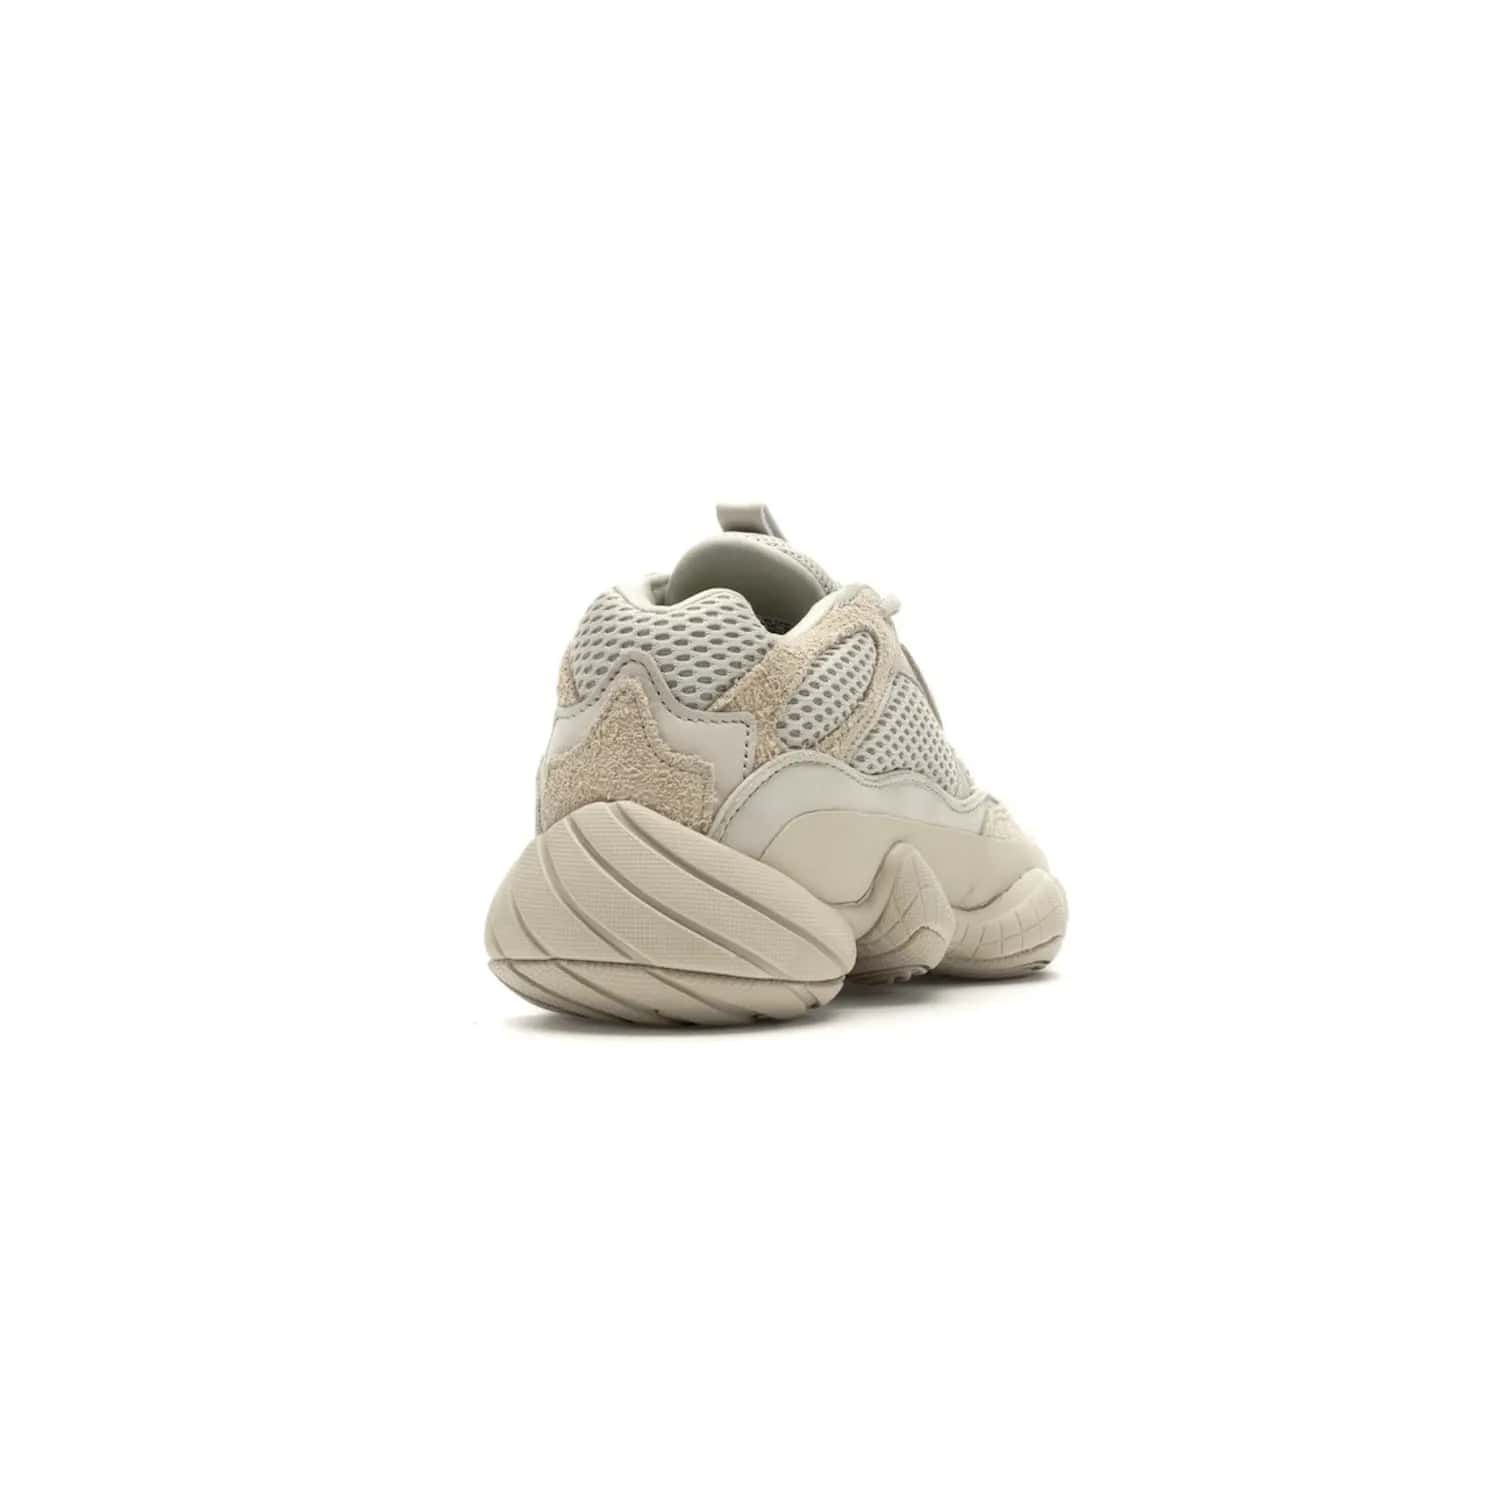 adidas Yeezy 500 Blush - Image 30 - Only at www.BallersClubKickz.com - Step up your sneaker game with the Adidas Yeezy 500 Blush. Monochromatic pale pink palette, hiking-inspired suede/mesh construction, plus adiPRENE sole for comfort and performance. Get the Adidas Yeezy 500 and experience true style and comfort.